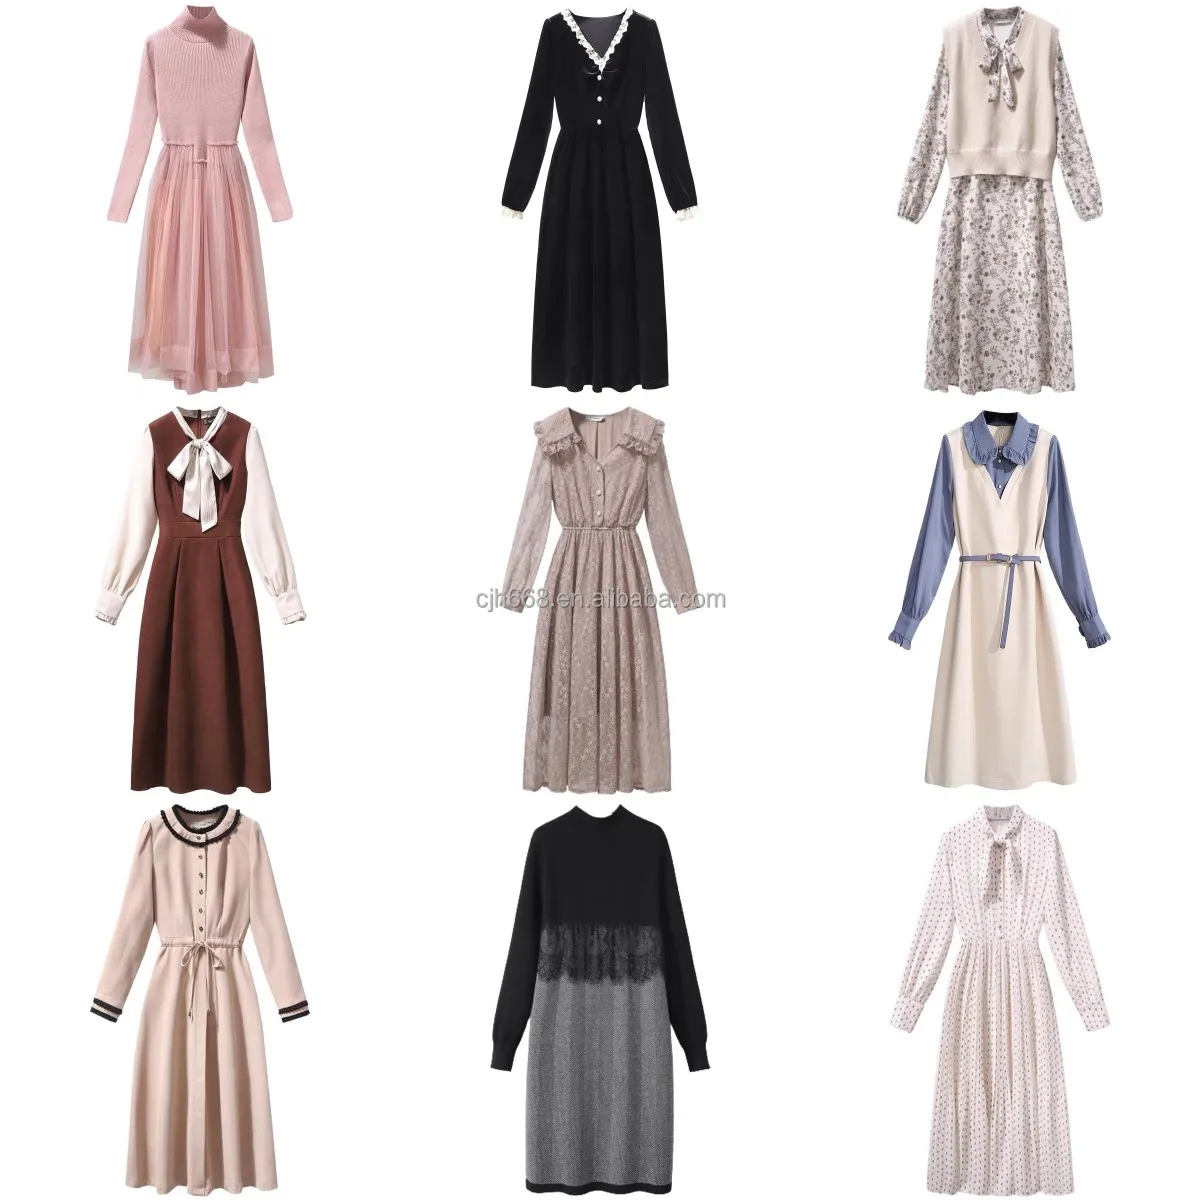 

Factory direct sales discount low French spring and autumn fashion women's dress sexy leisure party women's dress, Customized color